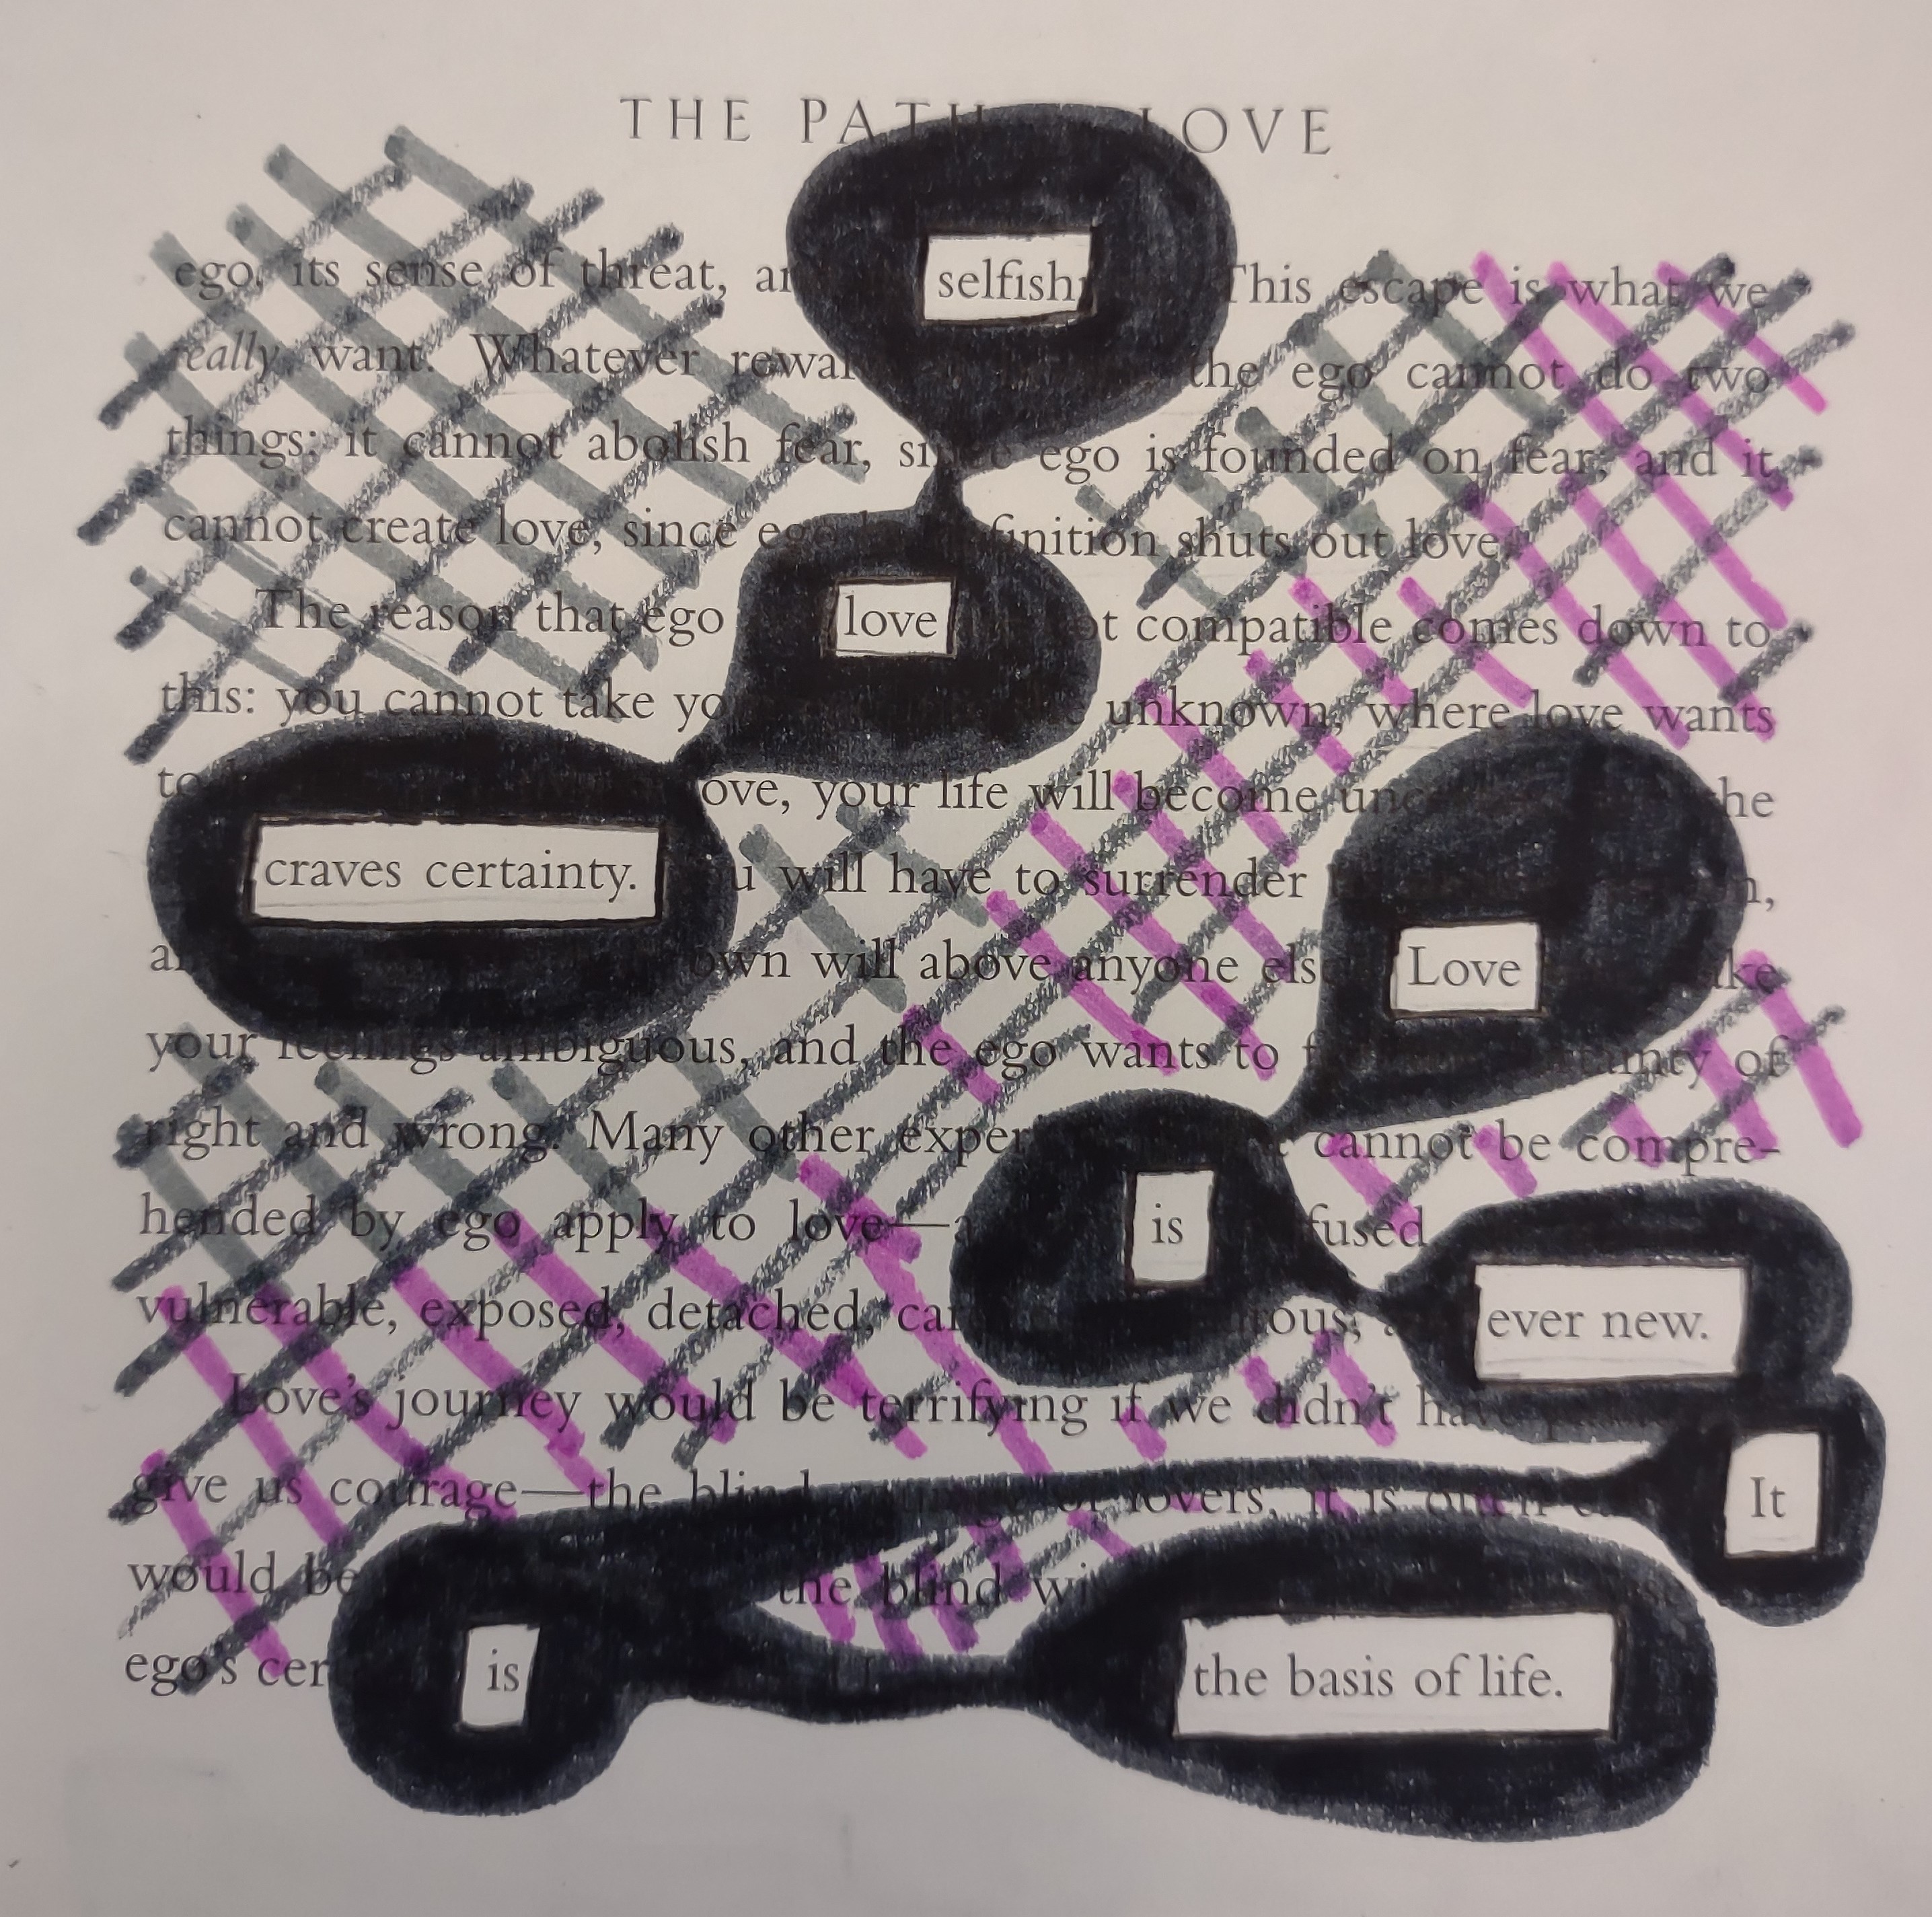 blackout poetry